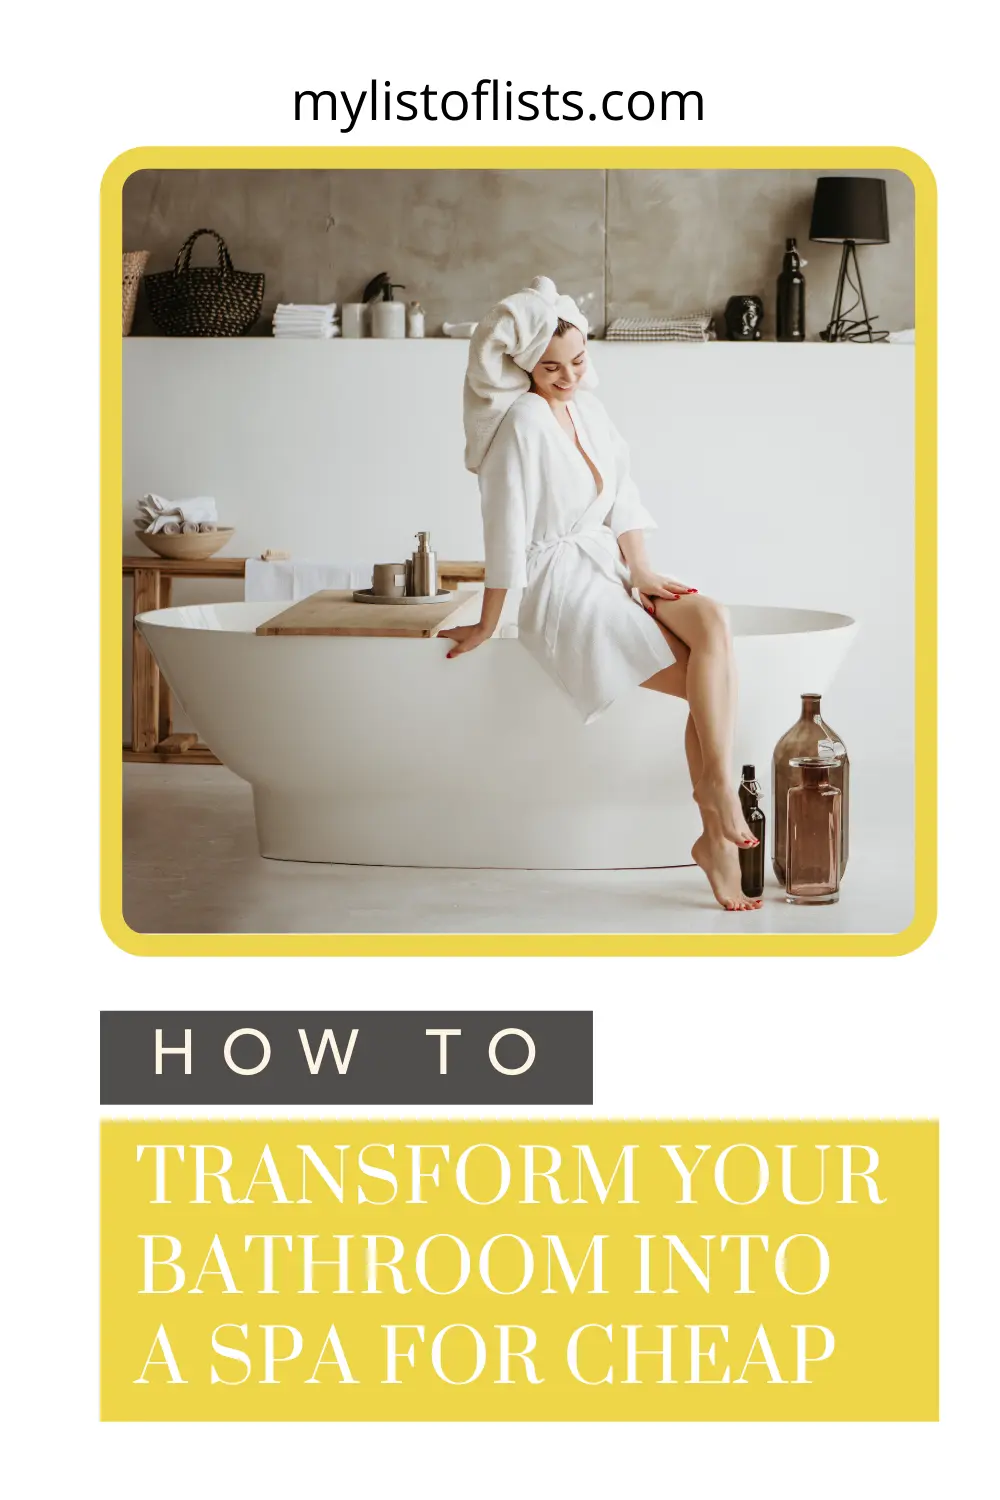 Mylistoflists.com is chock full of creative and practical ideas to make your everyday life easier. Don't waste any money at the spa when you can turn your own bathroom into a spa with these affordable ideas!